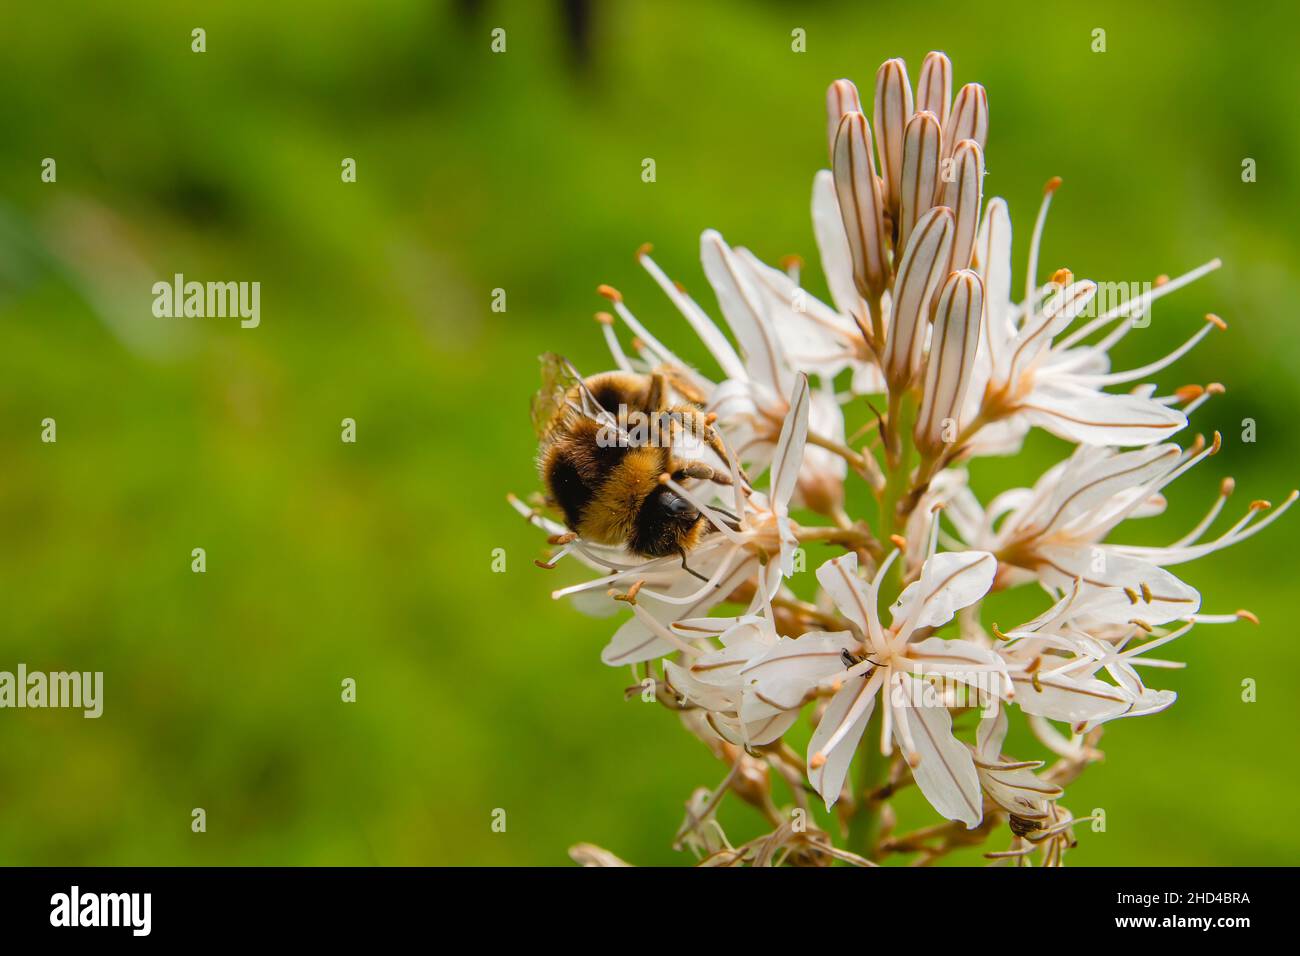 Bumble bee pollinating summer asphodel flowers Stock Photo